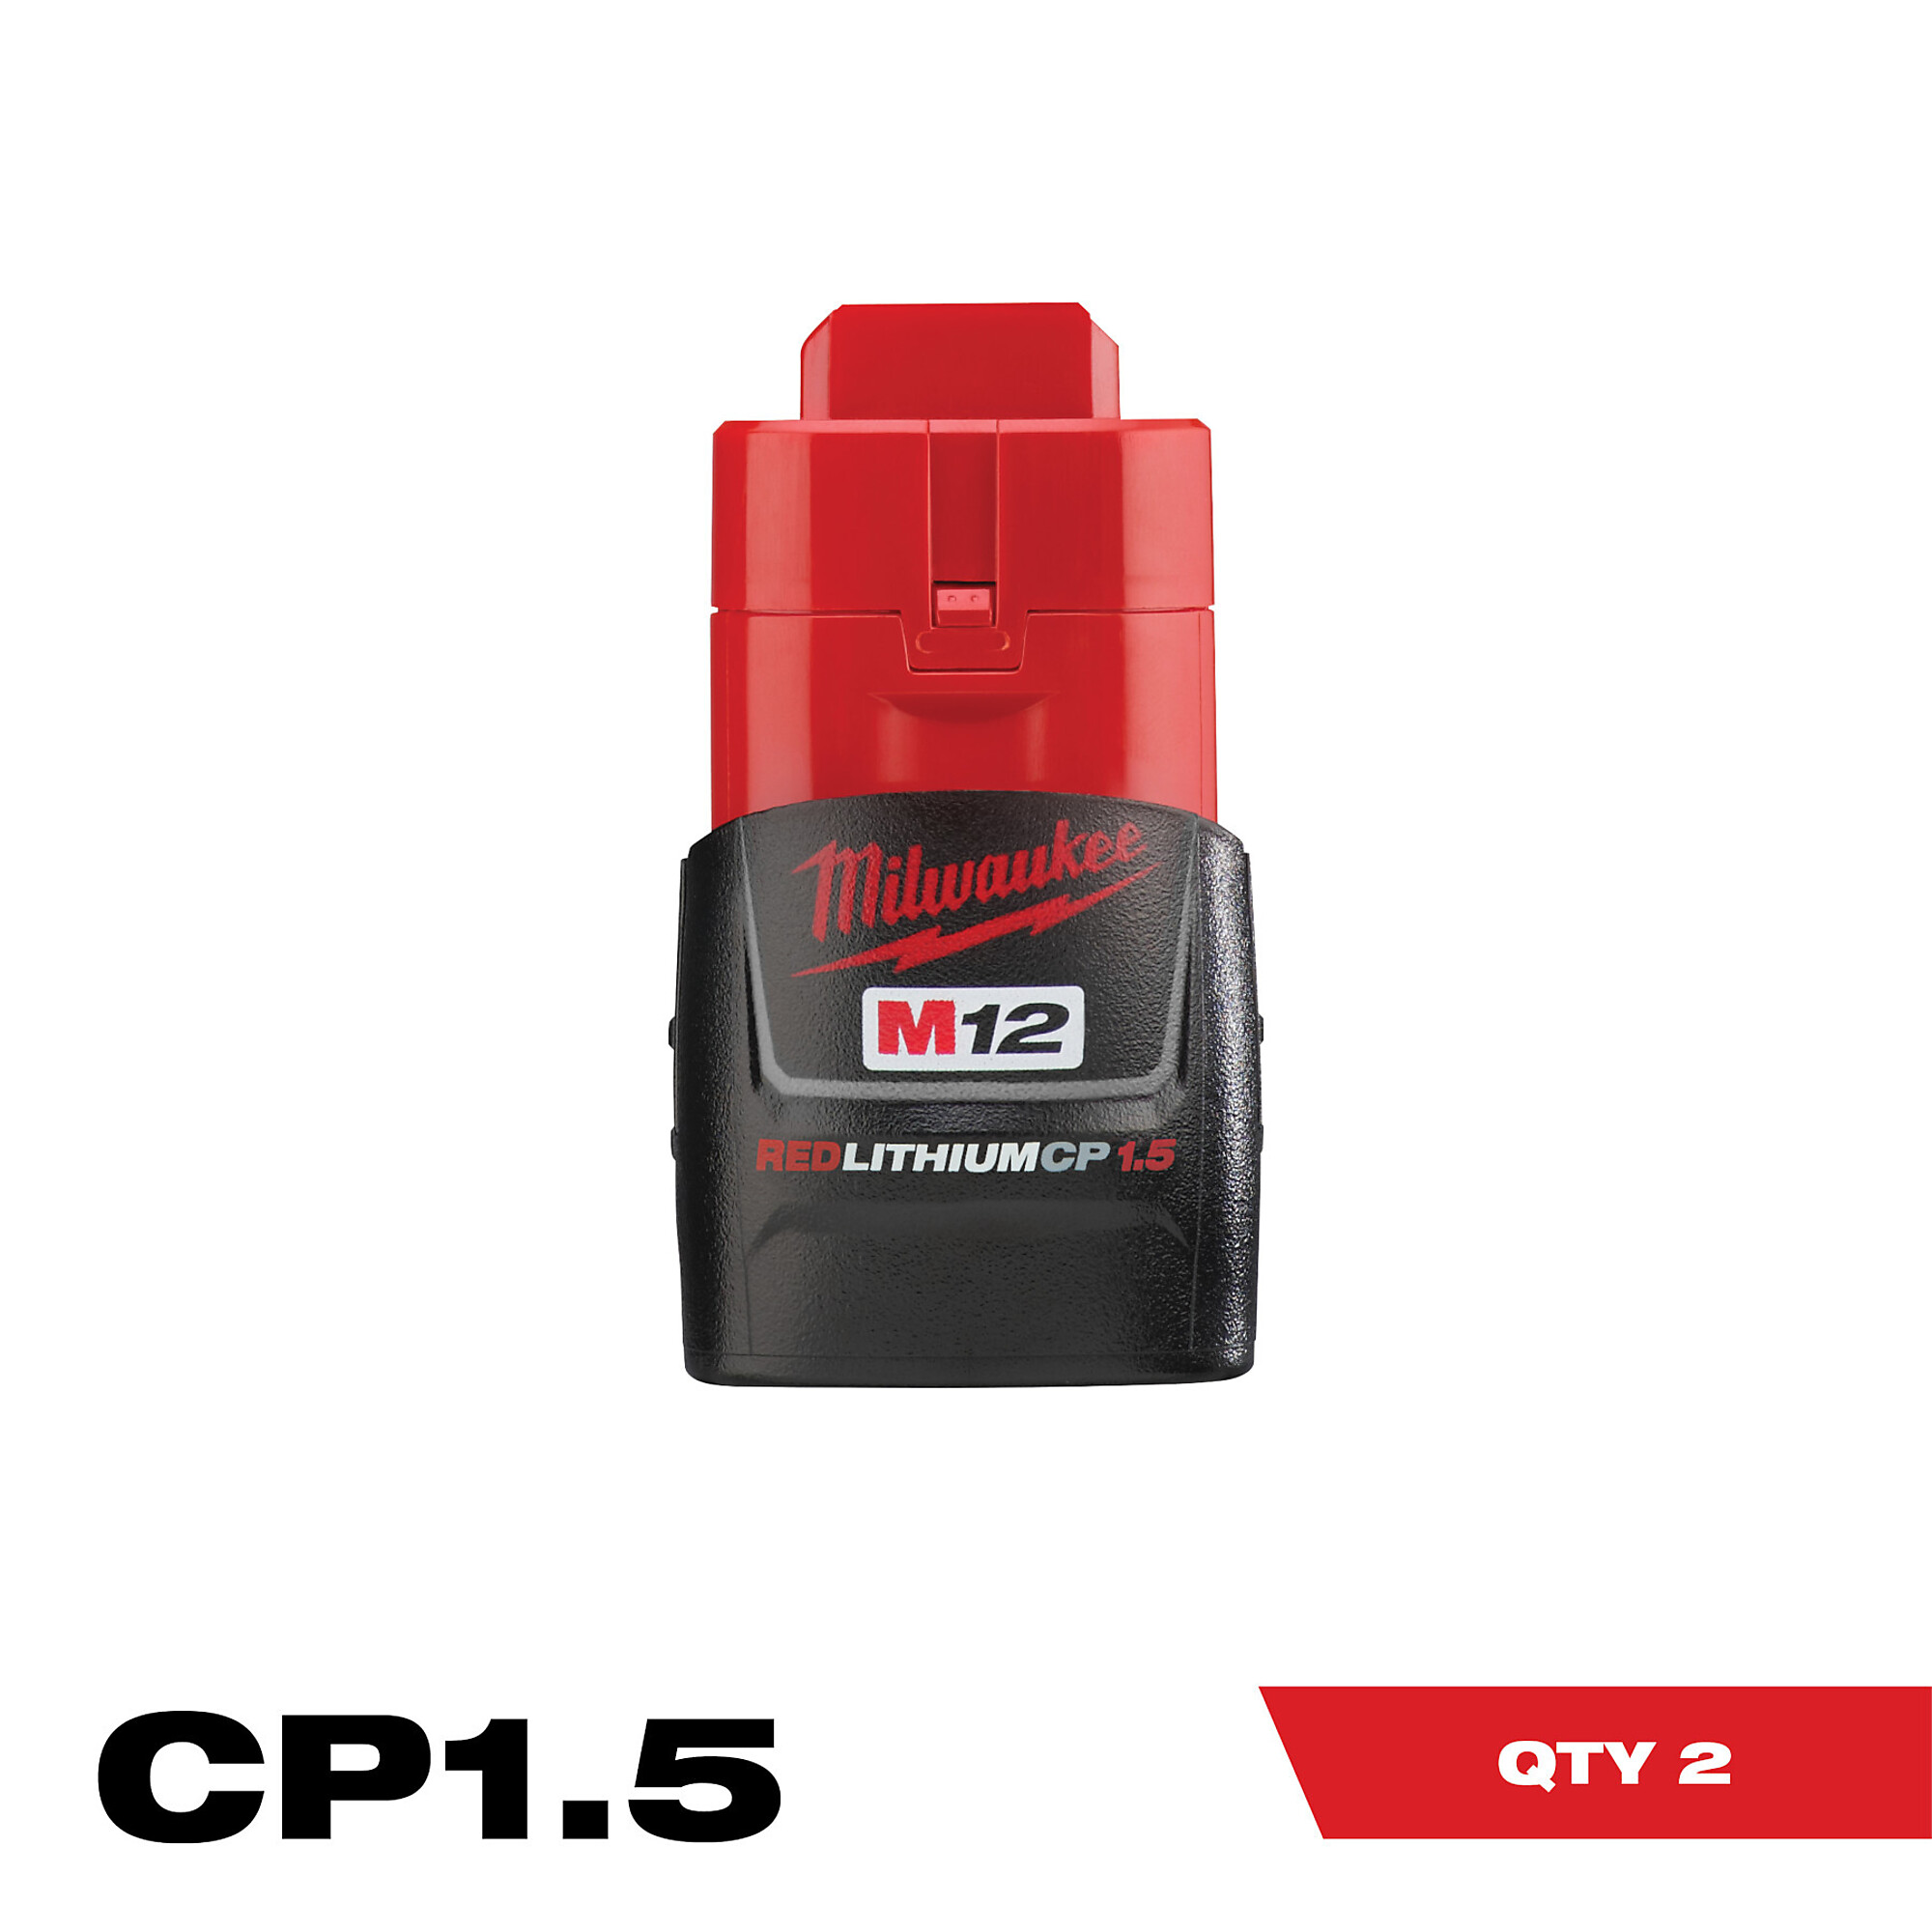 Milwaukee M12 RedLithium Compact 1.5Ah Battery, 2-Pack, Model 48-11-2411